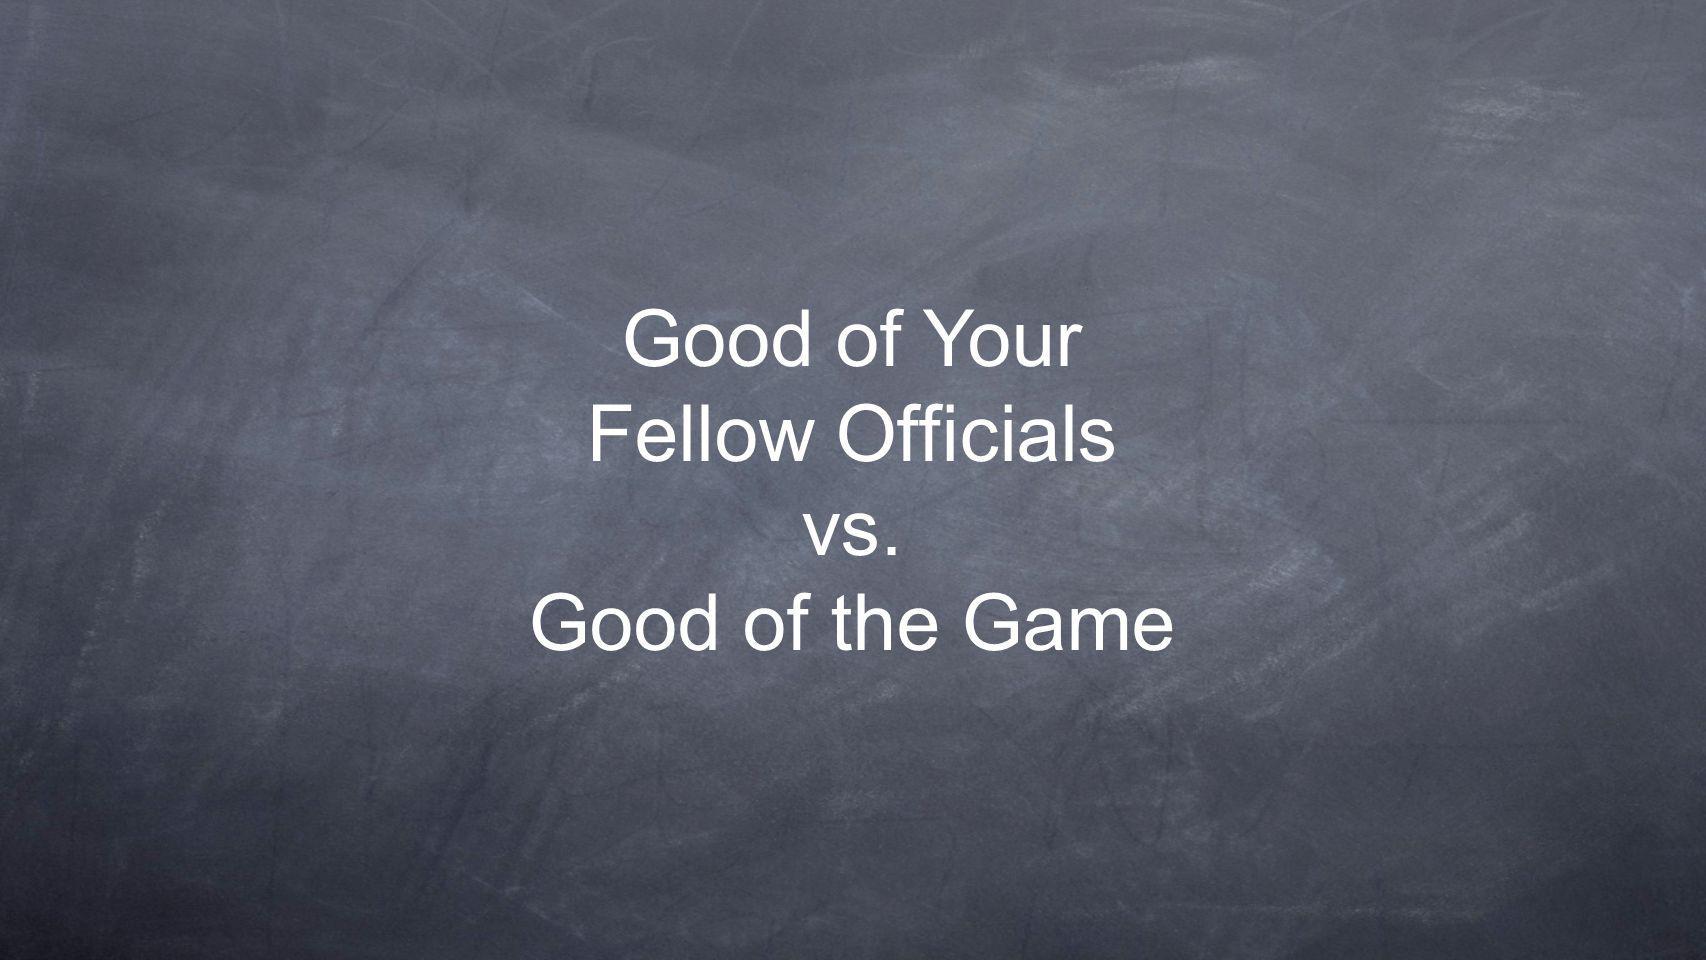 Good of Your Fellow Officials vs. Good of the Game